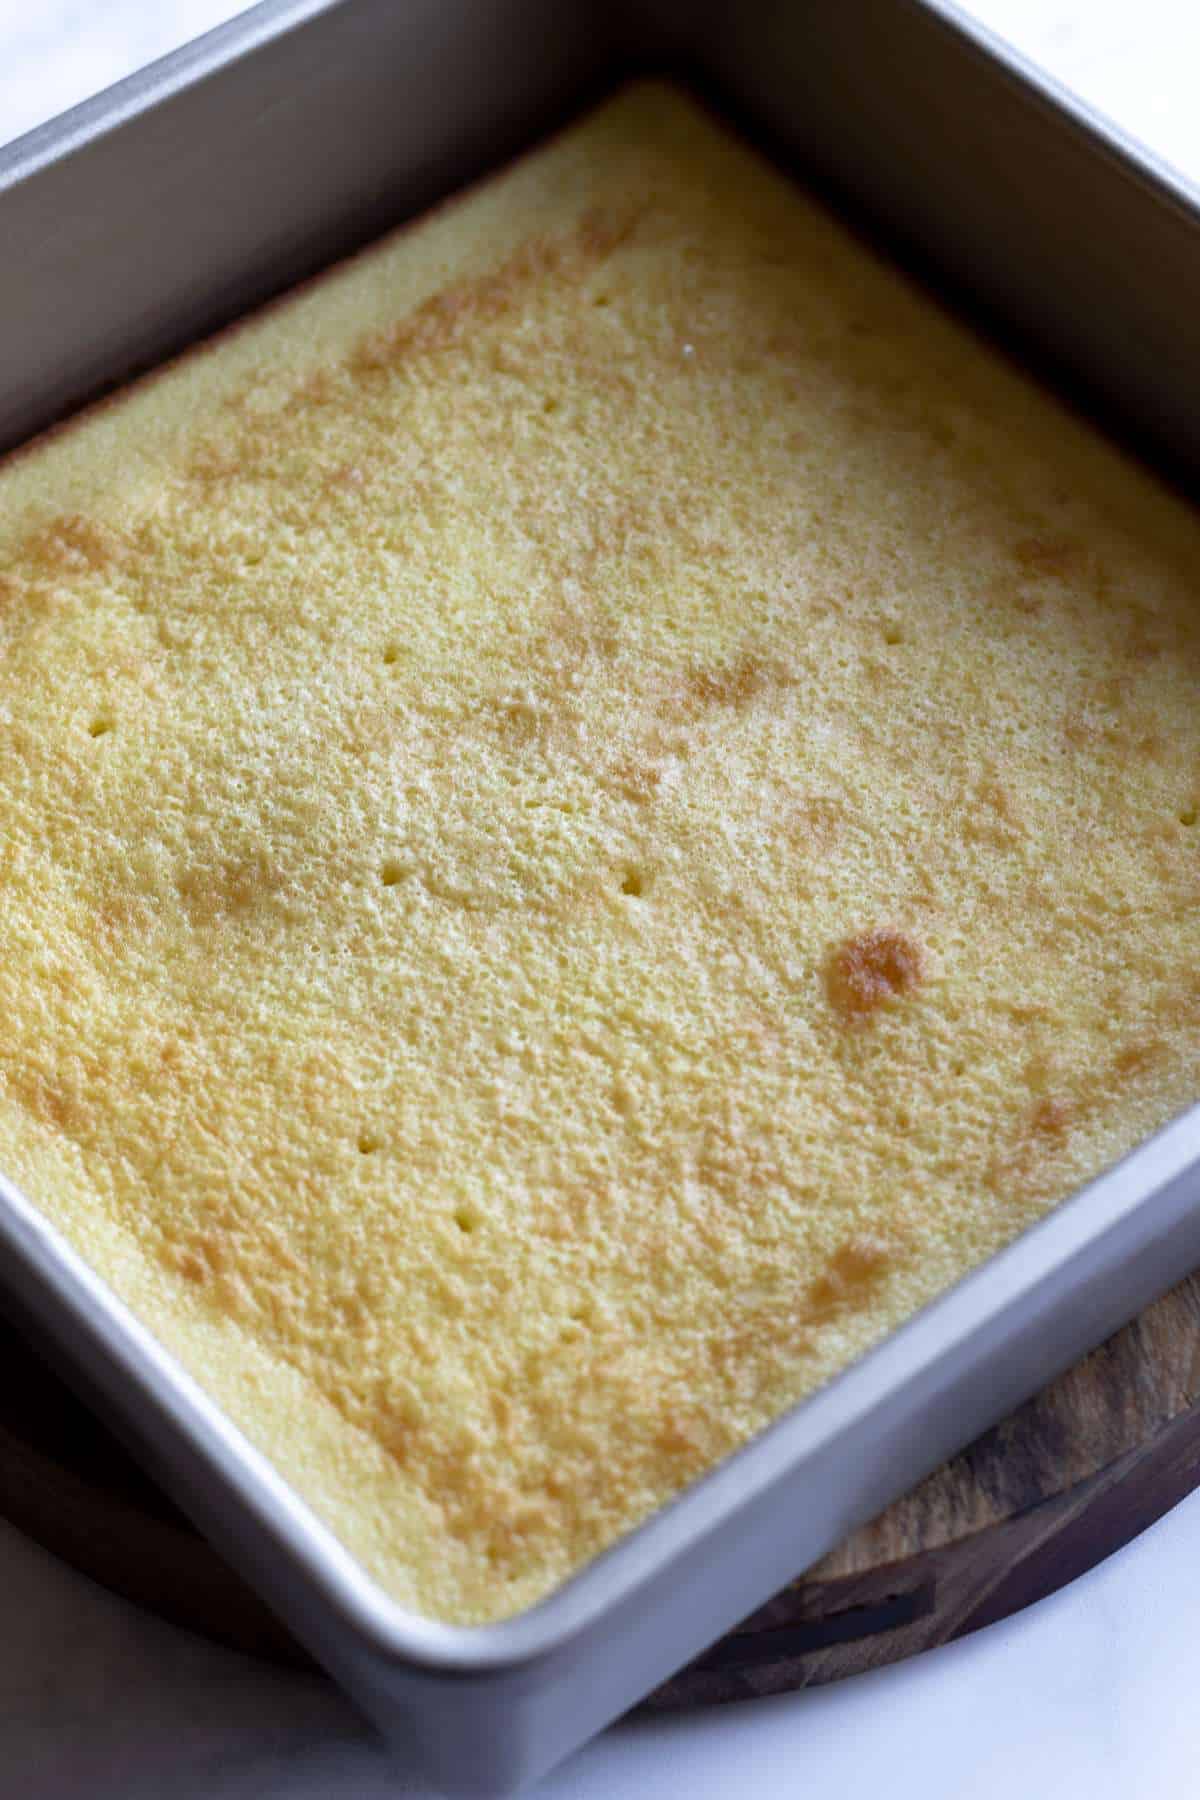 Baked cake layer in a dish.